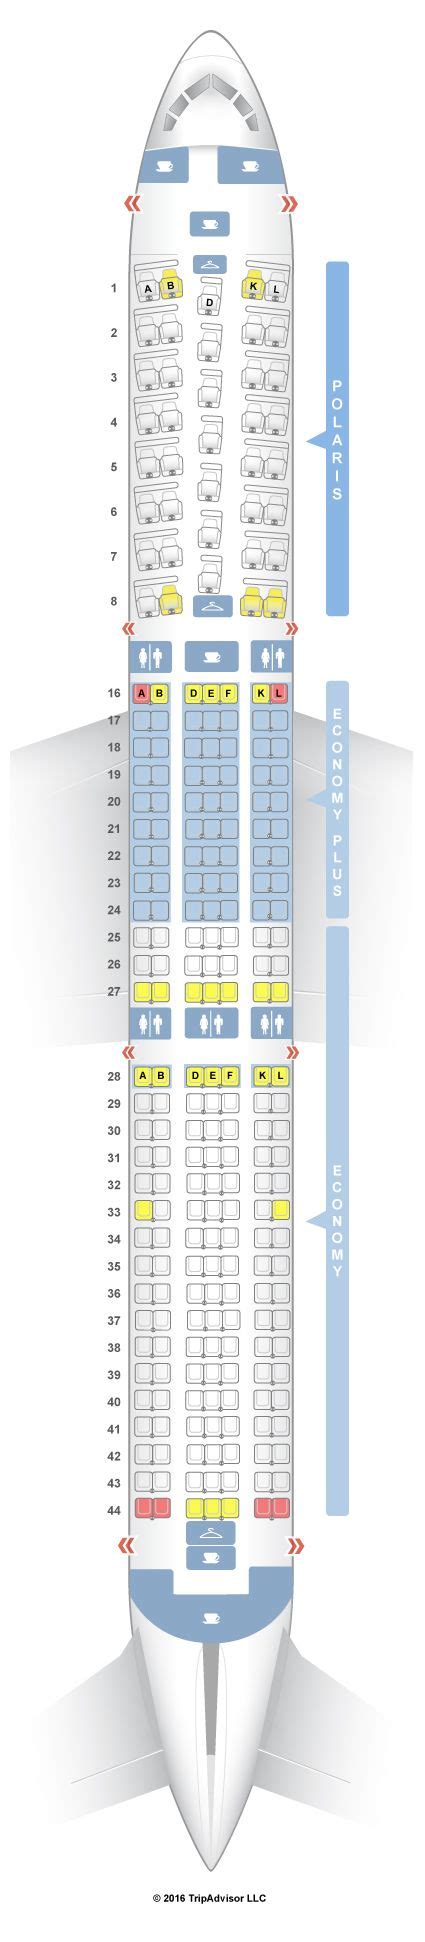 boeing 767 seat map united